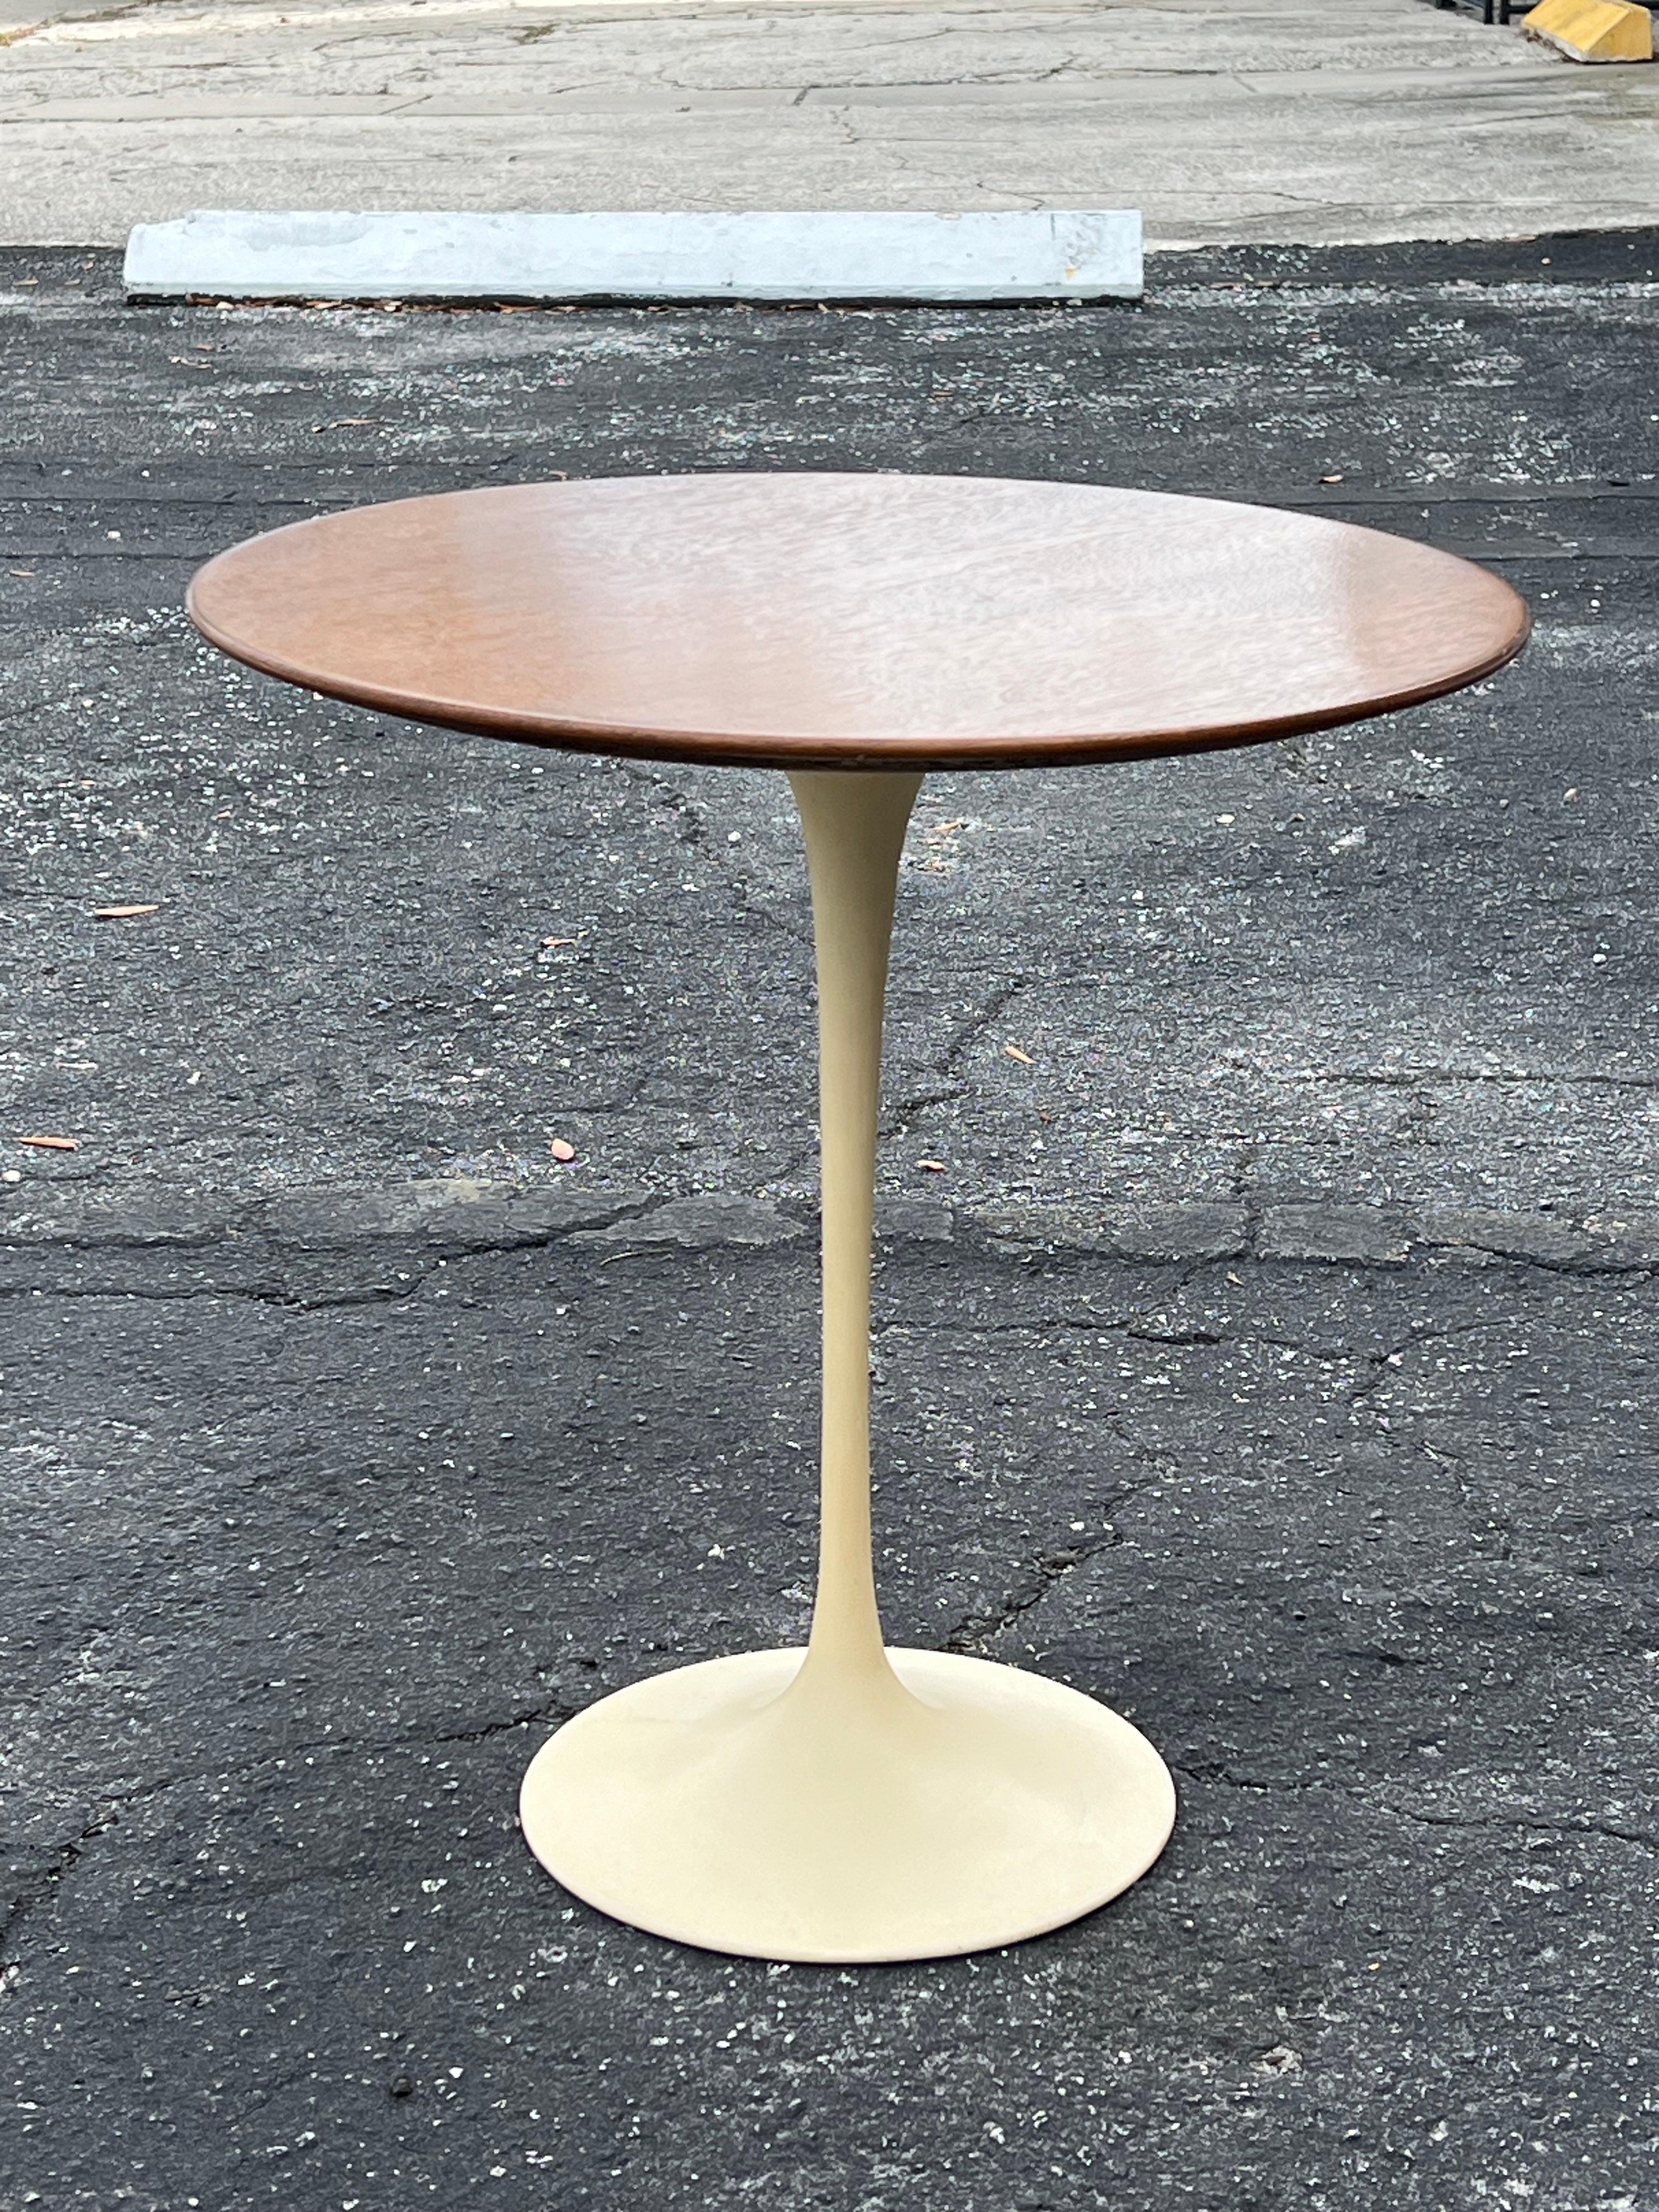 A Classic Eero Saarinen for Knoll occasional table with walnut top. Excellent original condition, base has a cream color, original tag intact.